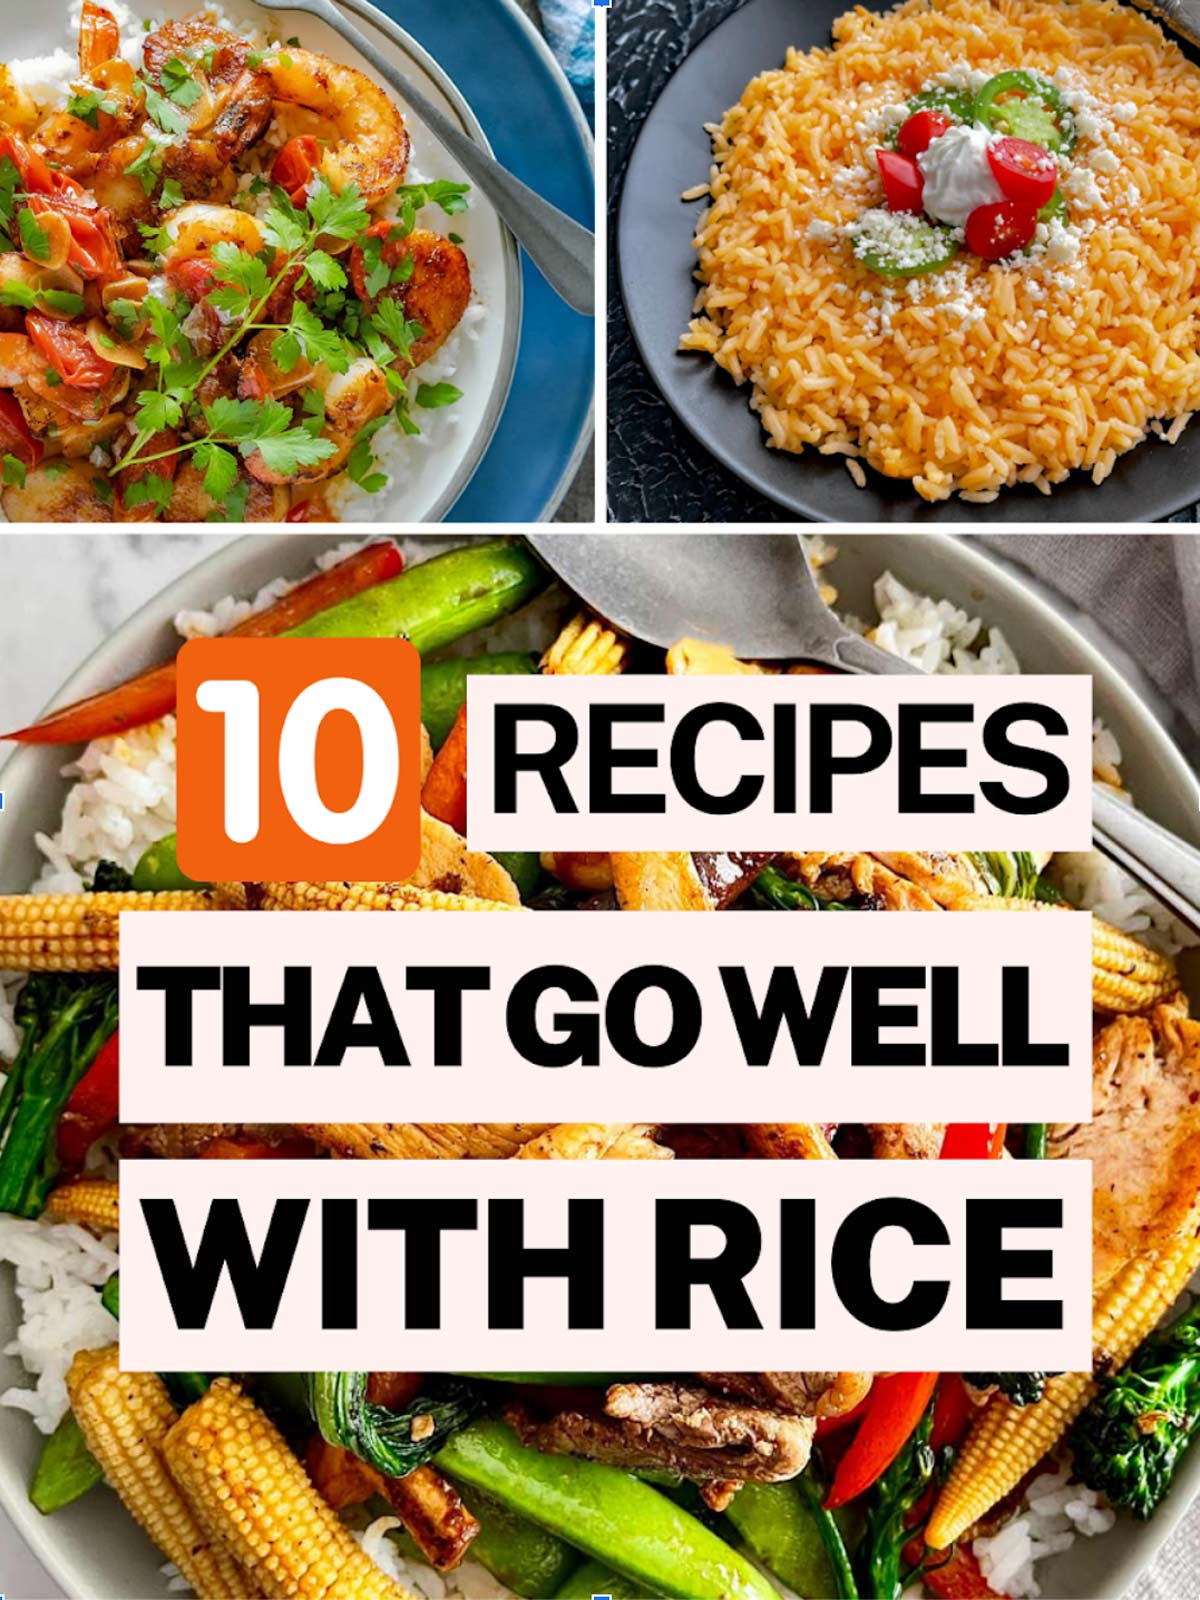 Collage of rice dishes for My Top 10 Recipes with Rice.